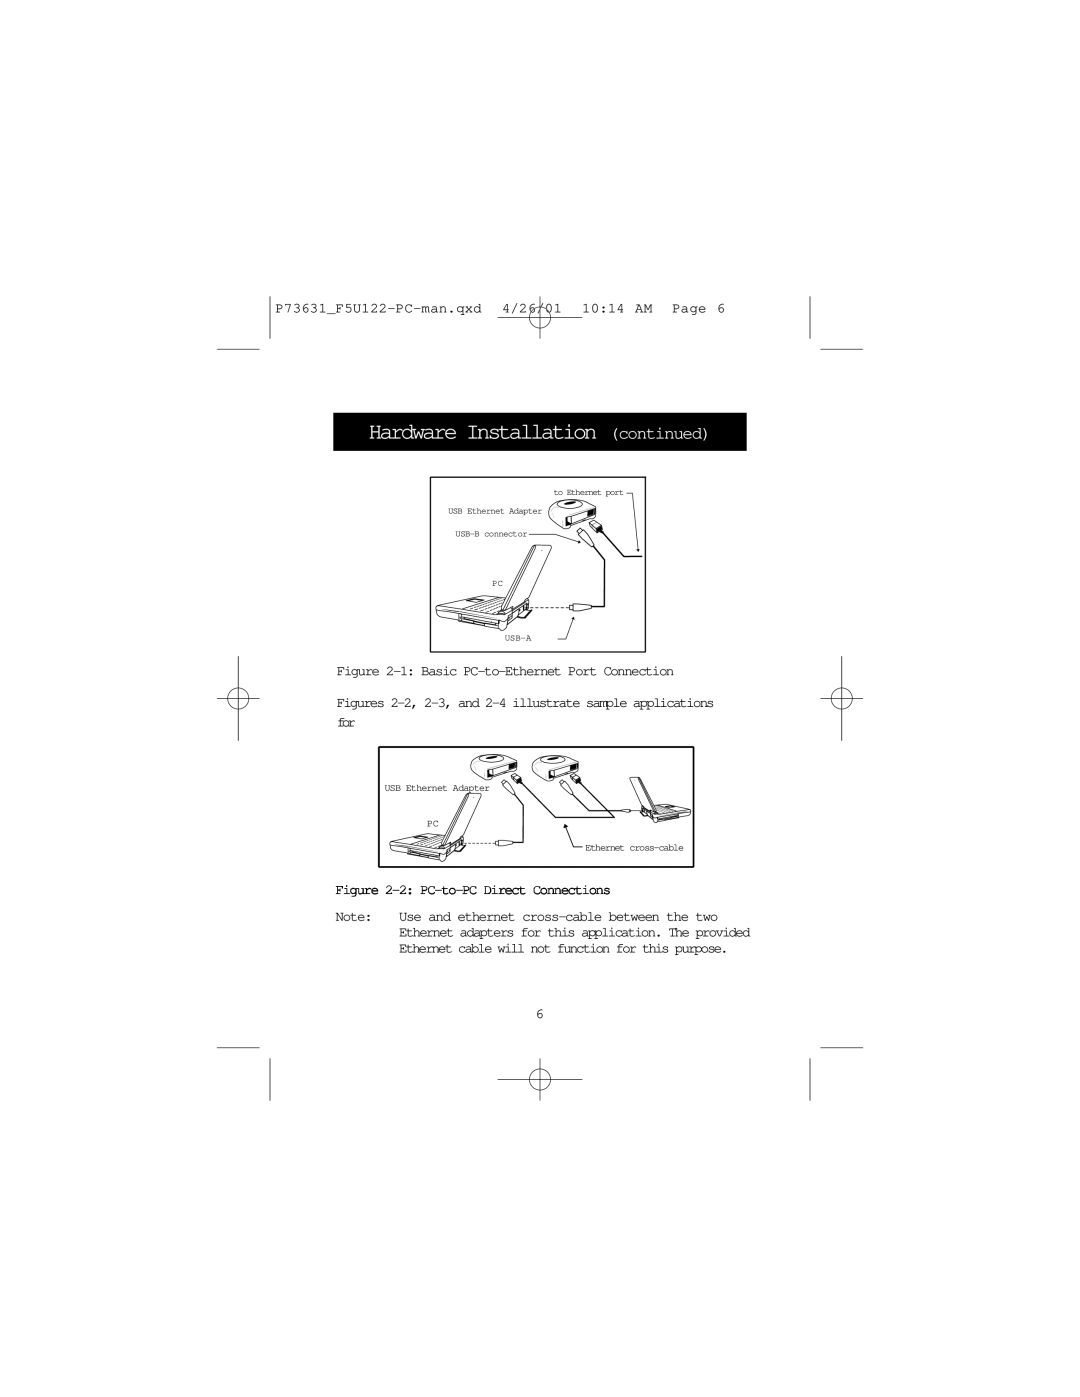 Belkin F5U122-PC user manual Hardware Installation continued, Figures 2-2, 2-3, and 2-4 illustrate sample applications for 